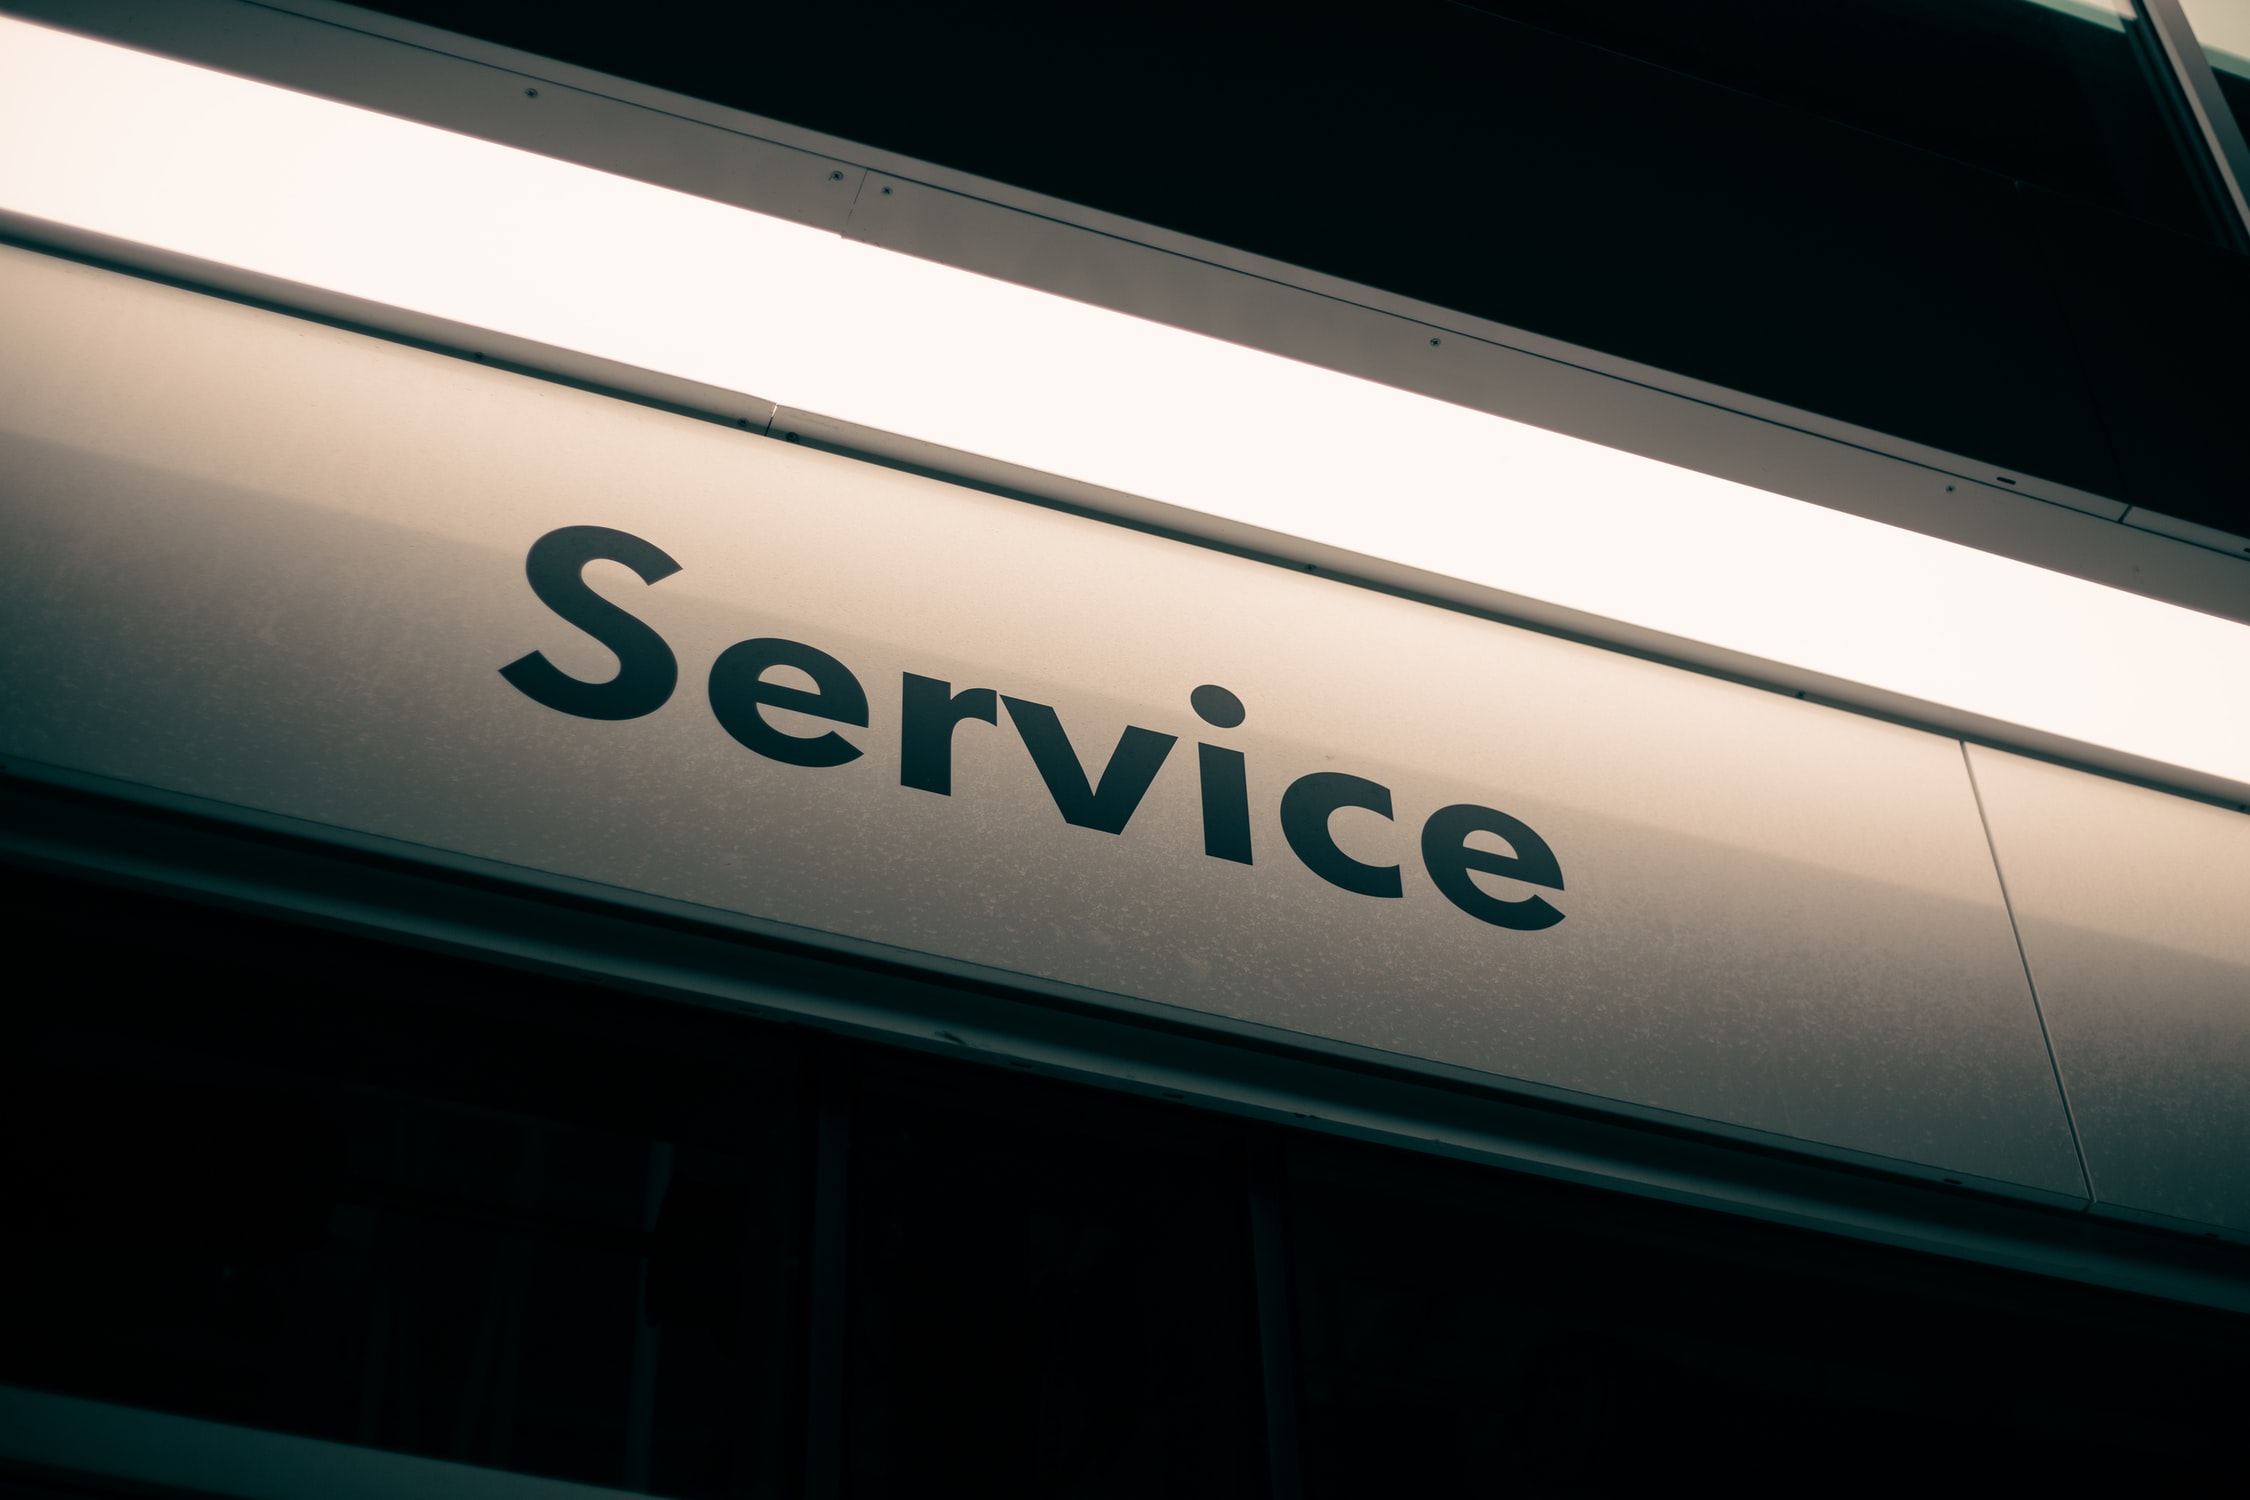 What is Customer Service? 